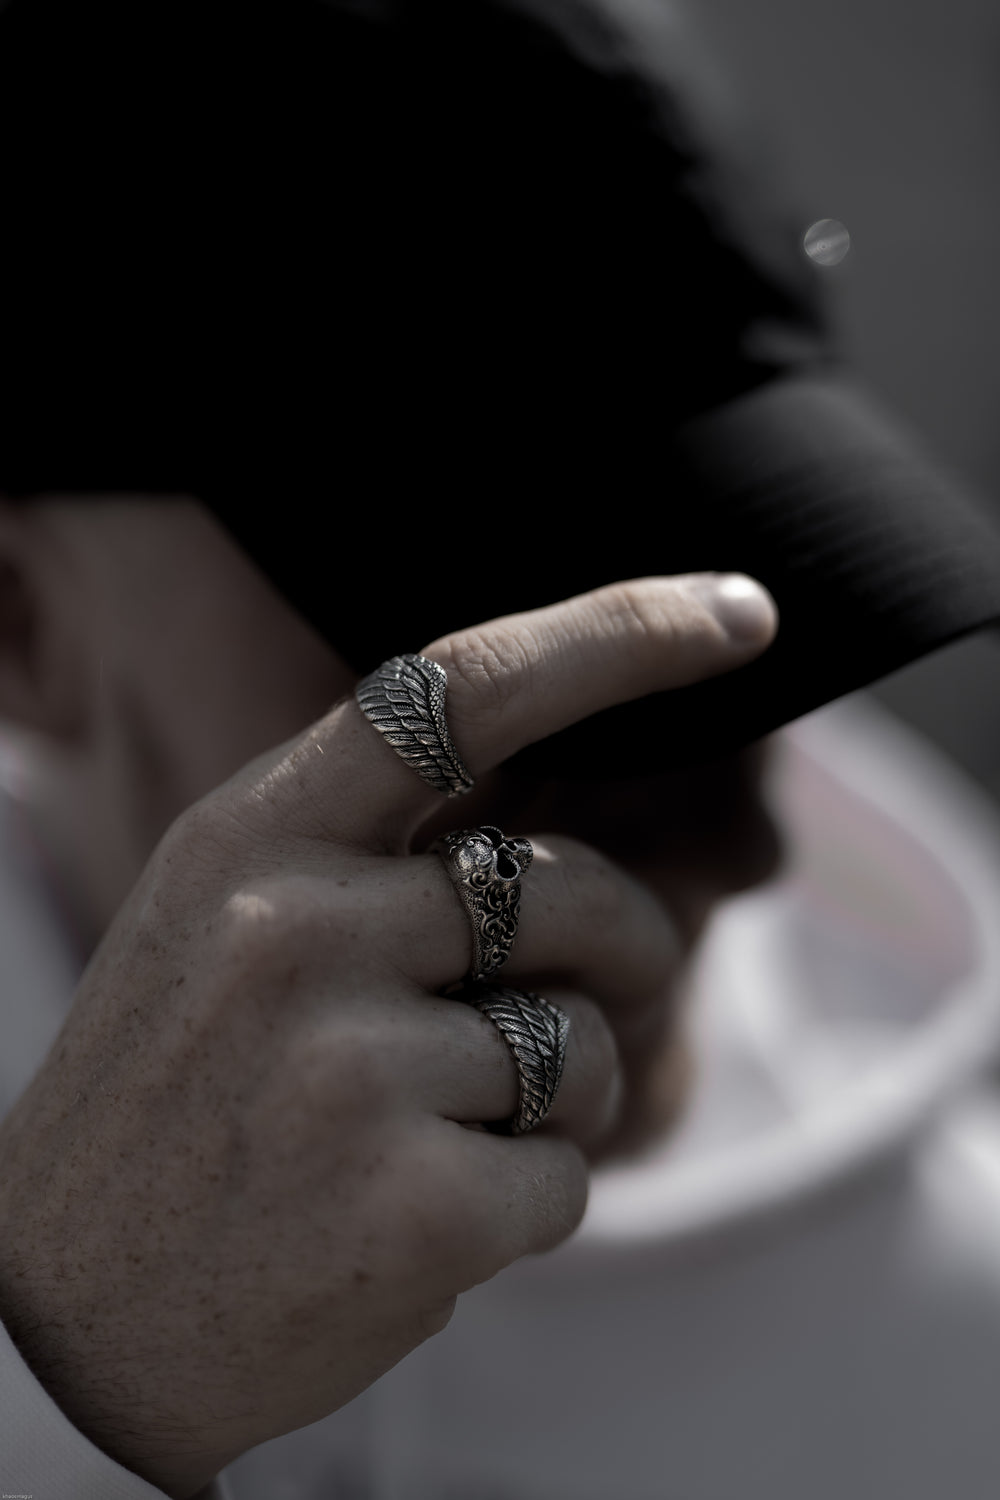 experience gothic and elegant fashion jewelry brand of steel wings and skull ring jewelry that can be enjoyed by any gender. man wearing silver skull ring with angel steel wings jewelry for gothic and streetwear fashion